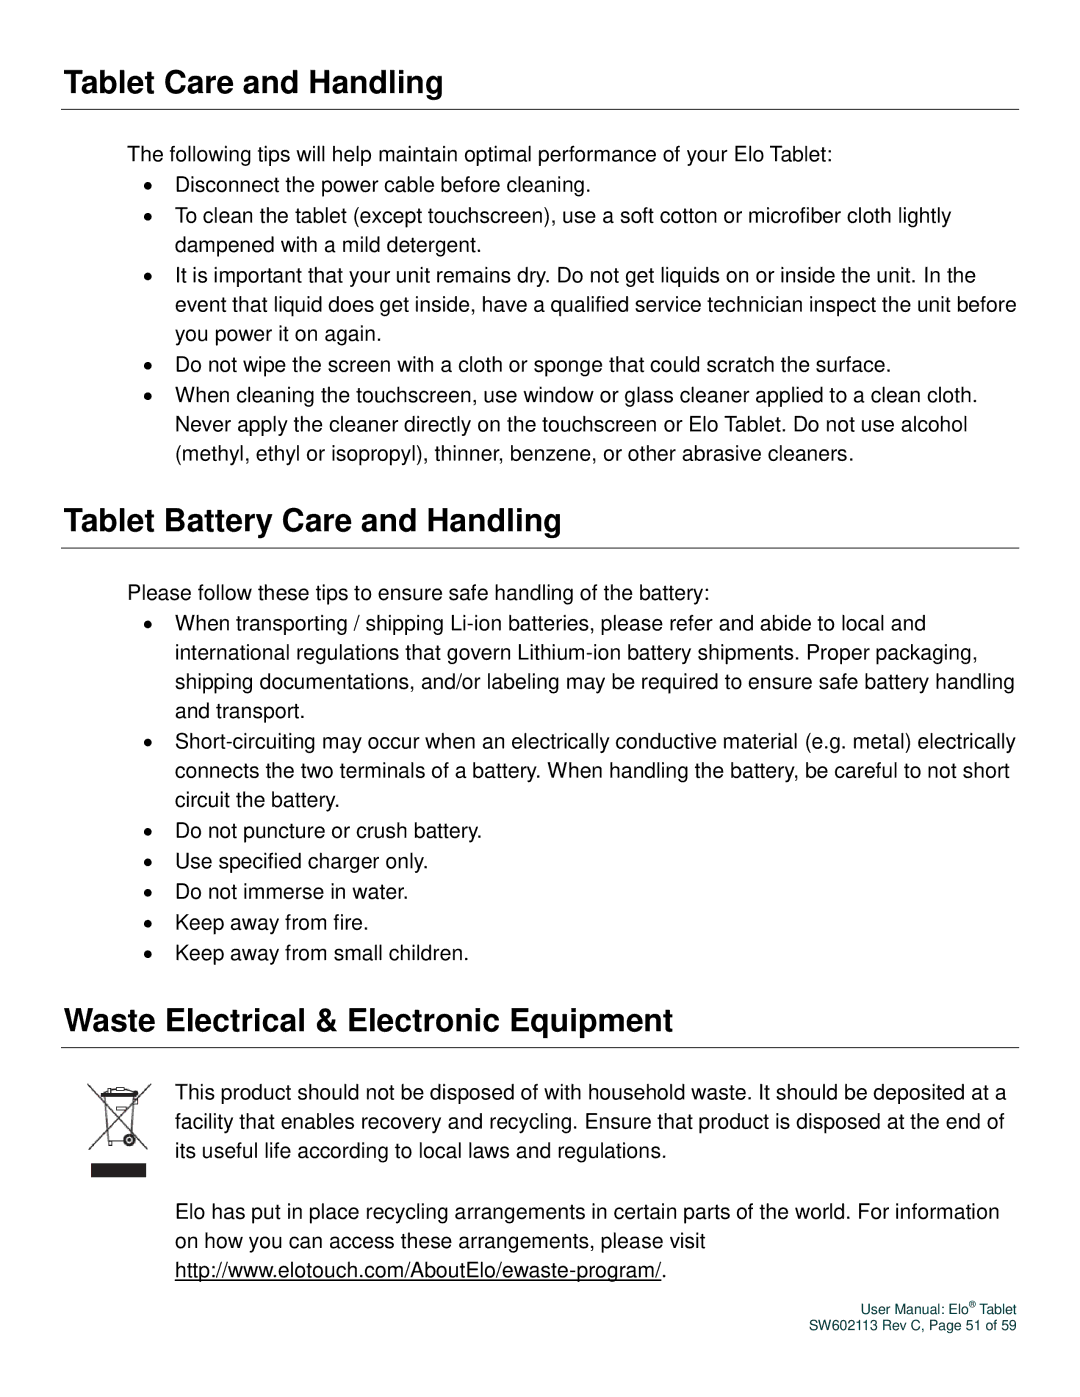 Elo TouchSystems SW602113 manual Tablet Care and Handling, Tablet Battery Care and Handling 